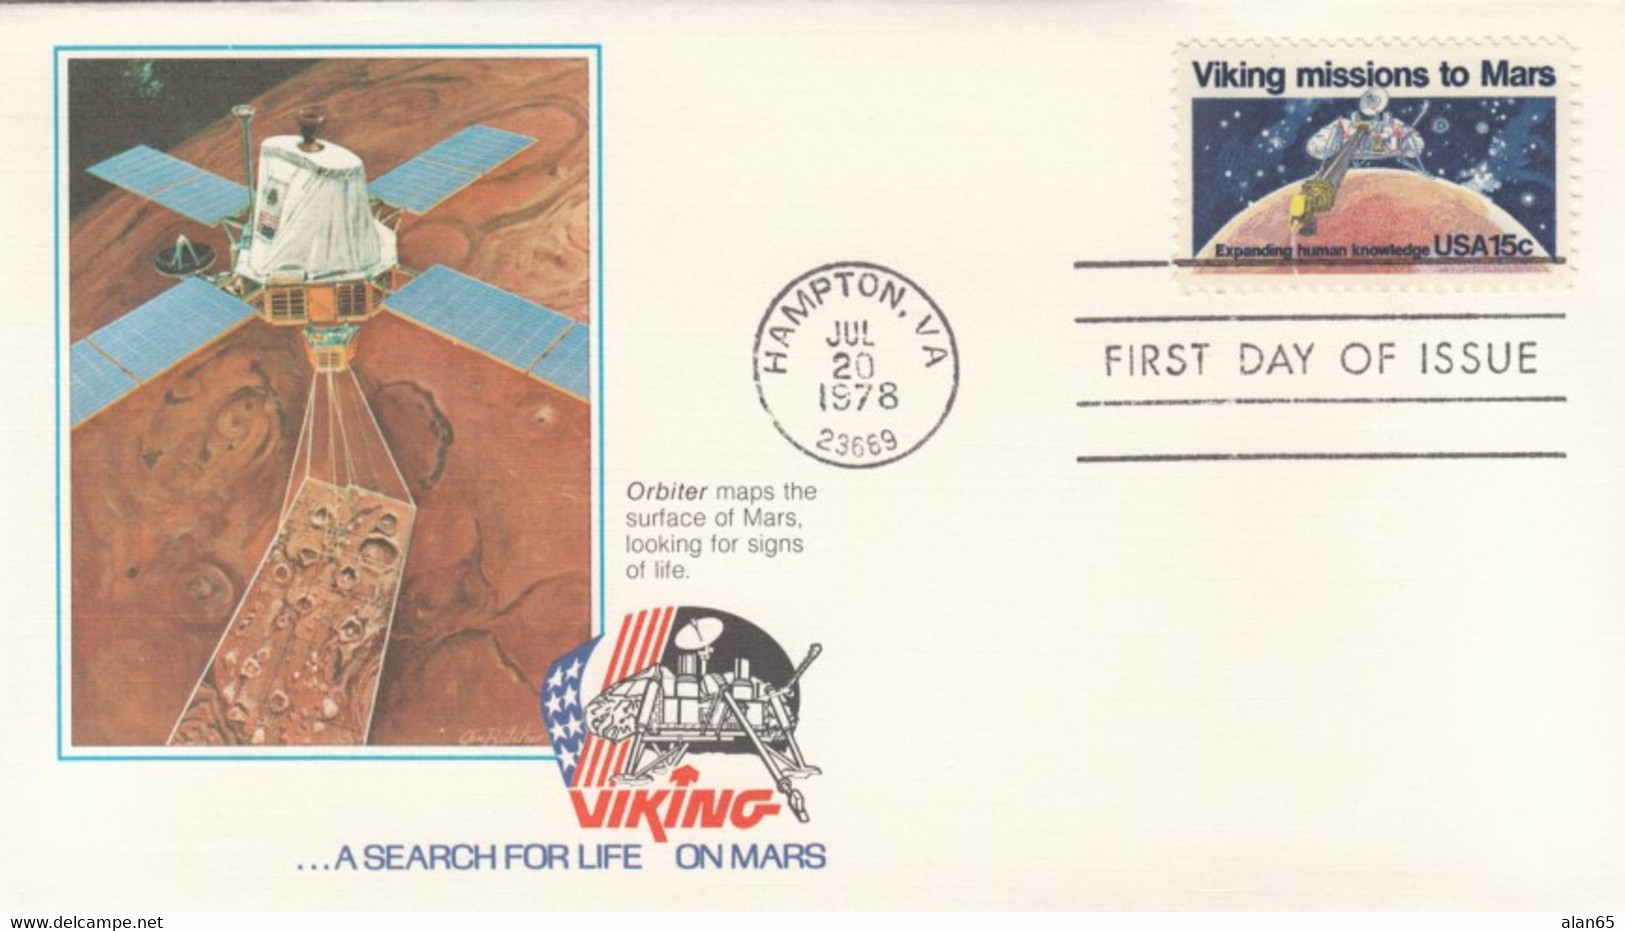 FDC Viking Mission To Mars, US Sc#1759 15c 20 July 1978 Issue, Viking Orbiter Maps Surface Of Mars Image Cachet - Amérique Du Nord